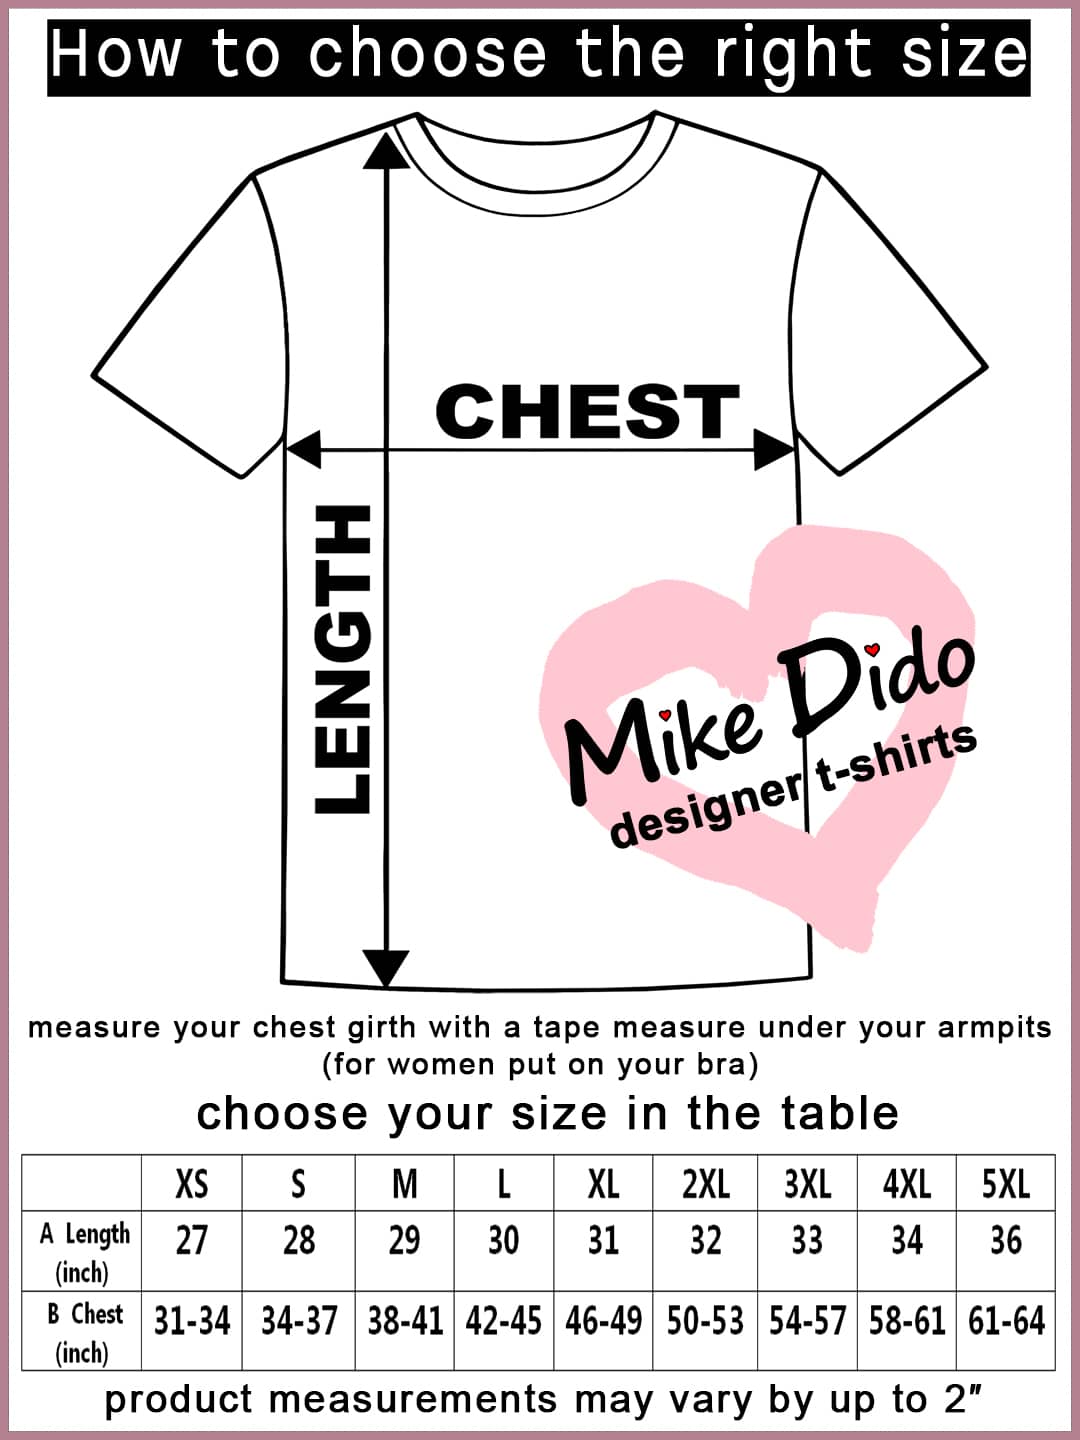 Stylish Designer Tee King Queen Love by Mike Dido